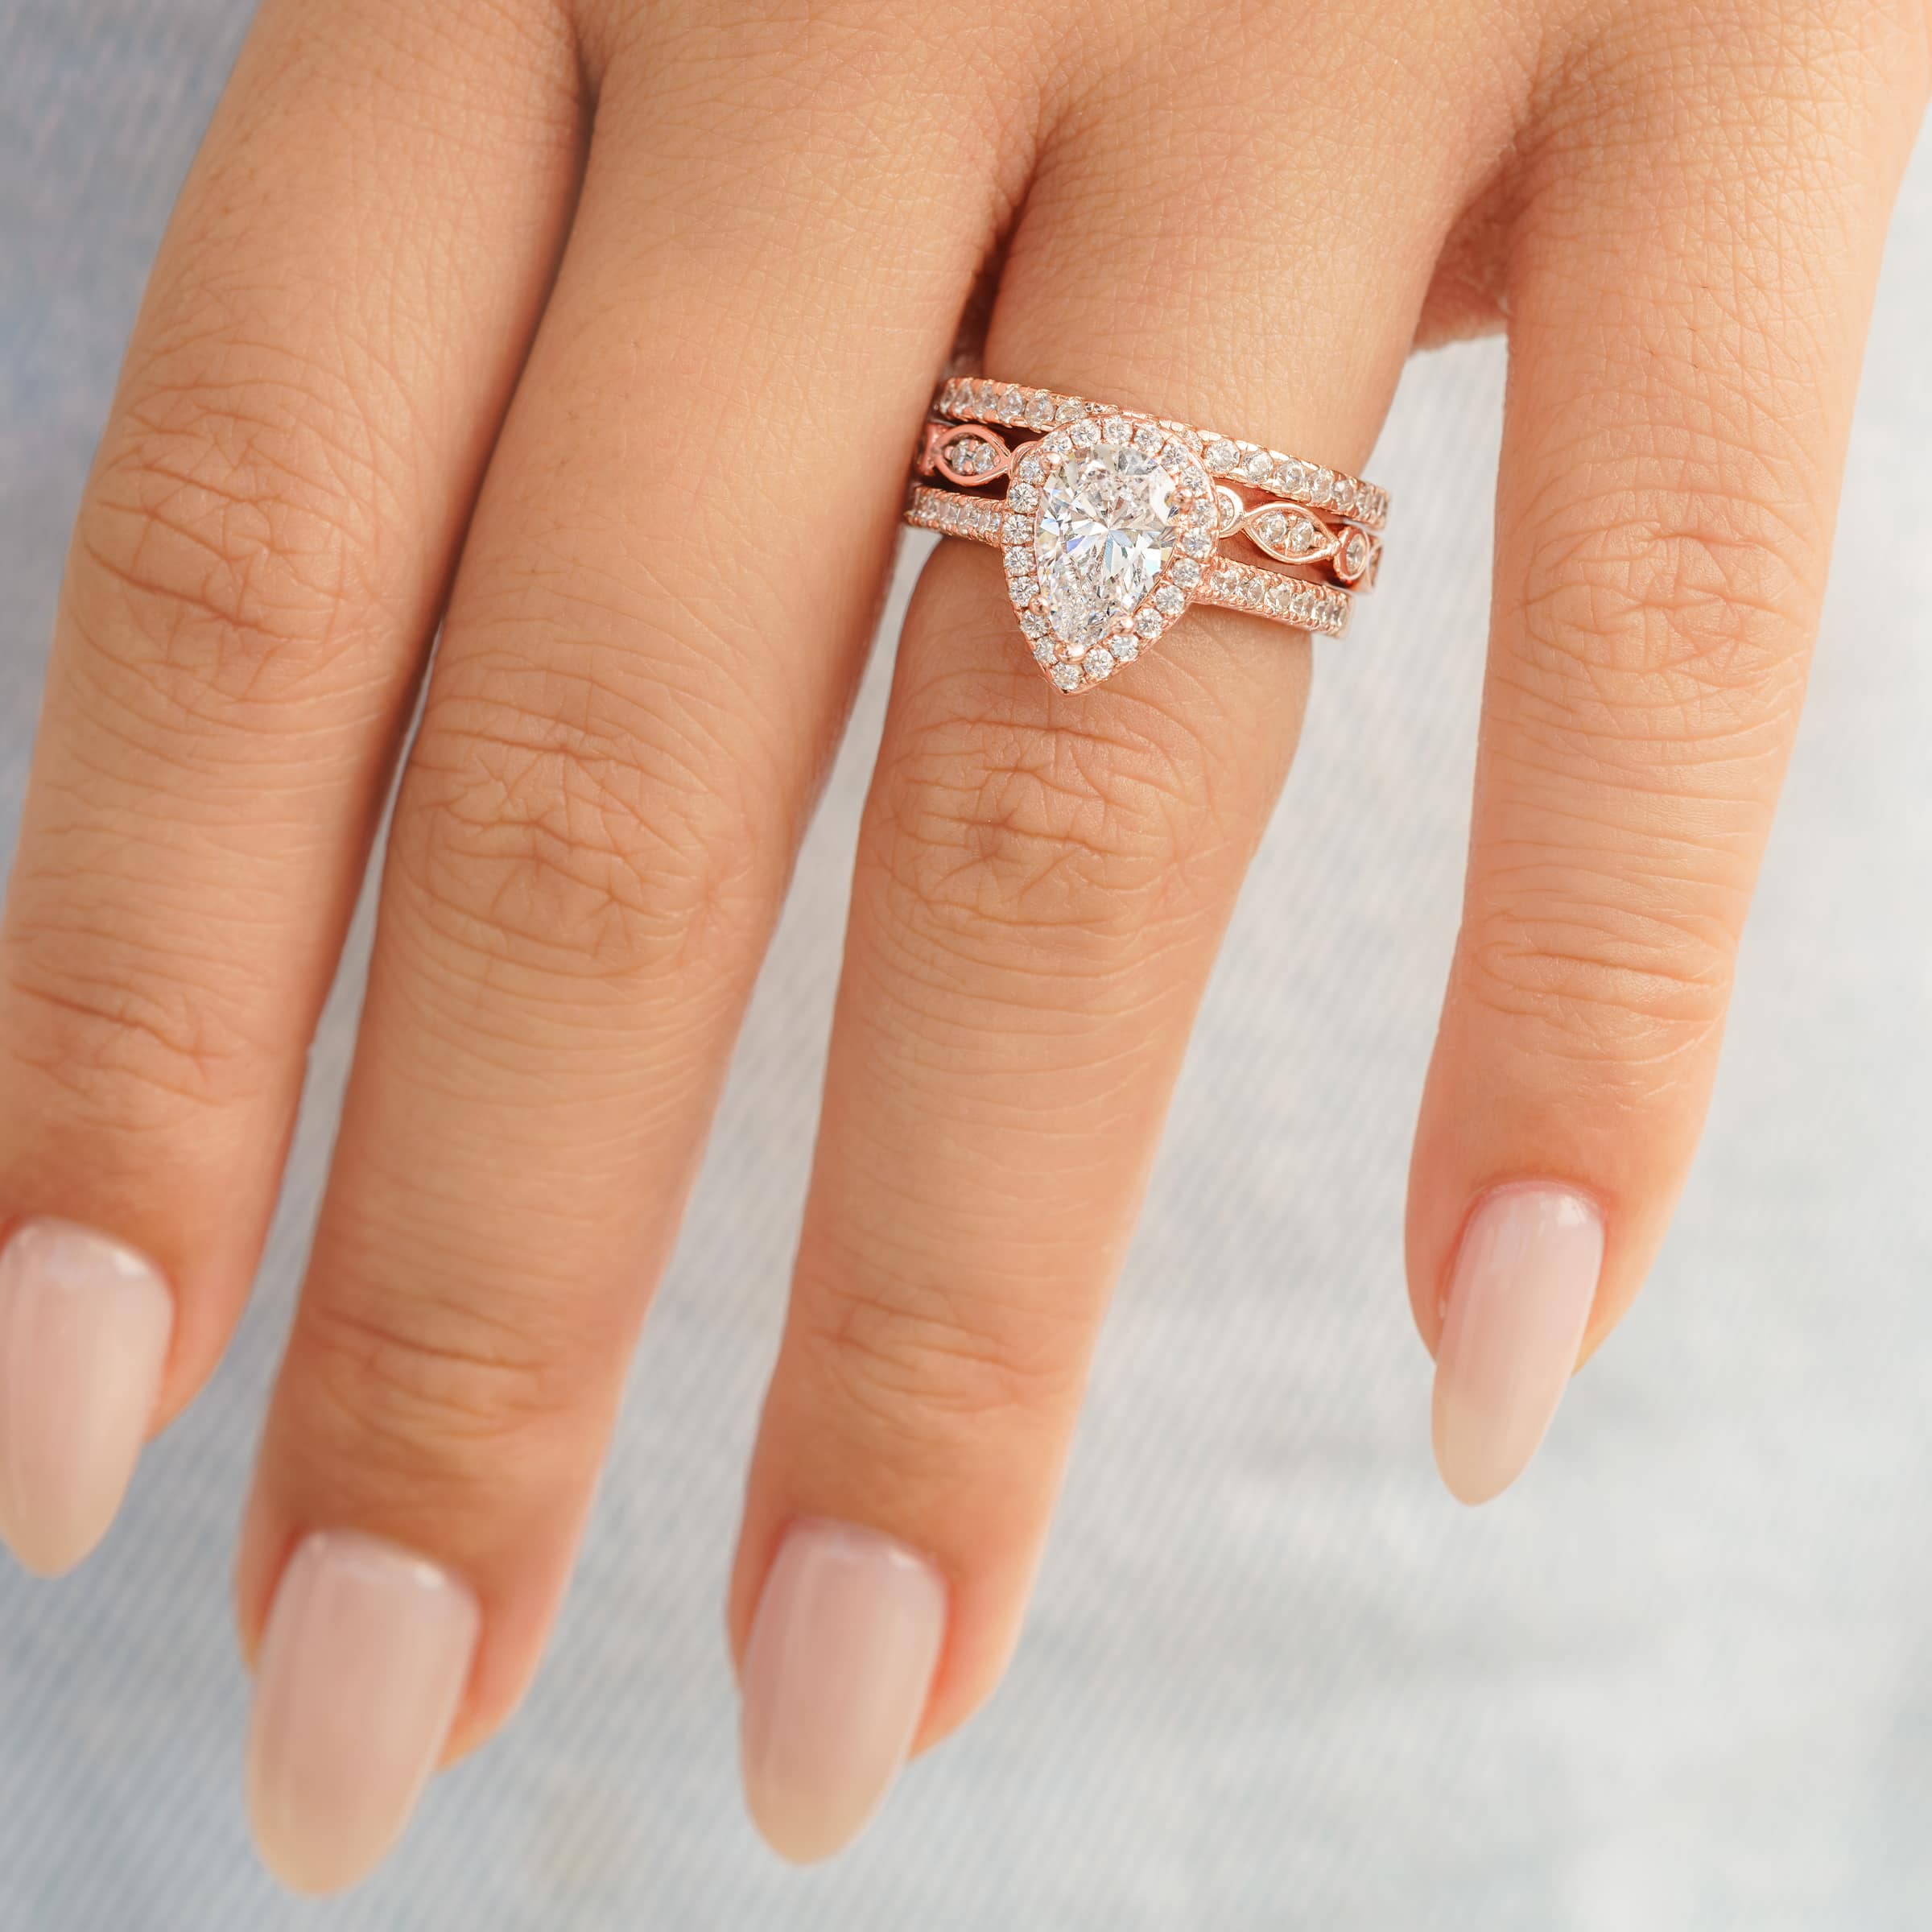 Modern Luxury Engagement Rings for Women - A.JAFFE